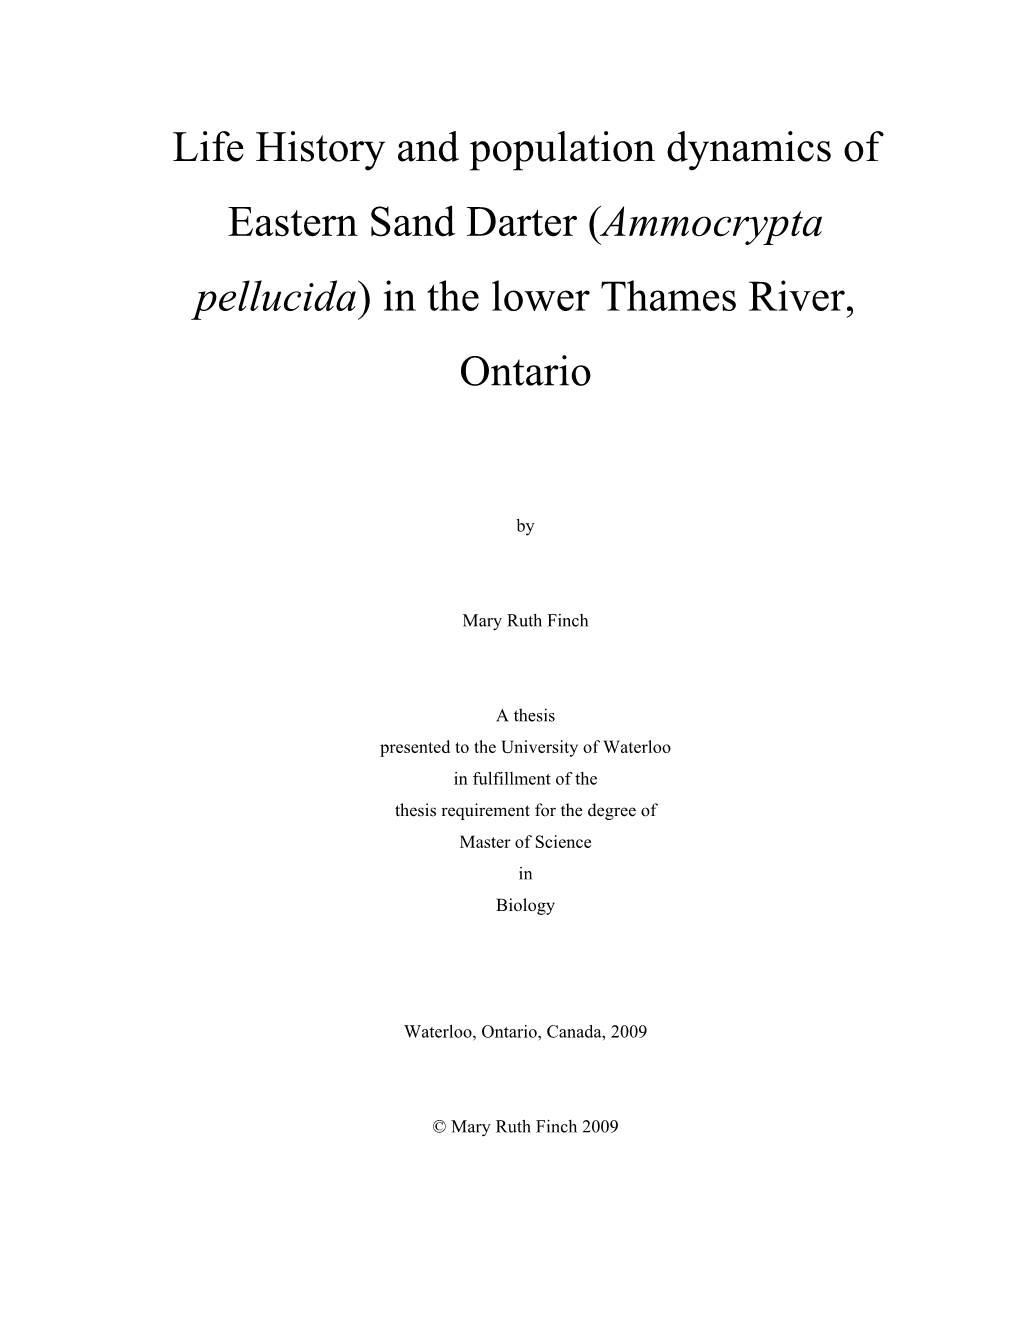 Life History and Population Dynamics of Eastern Sand Darter (Ammocrypta Pellucida) in the Lower Thames River, Ontario